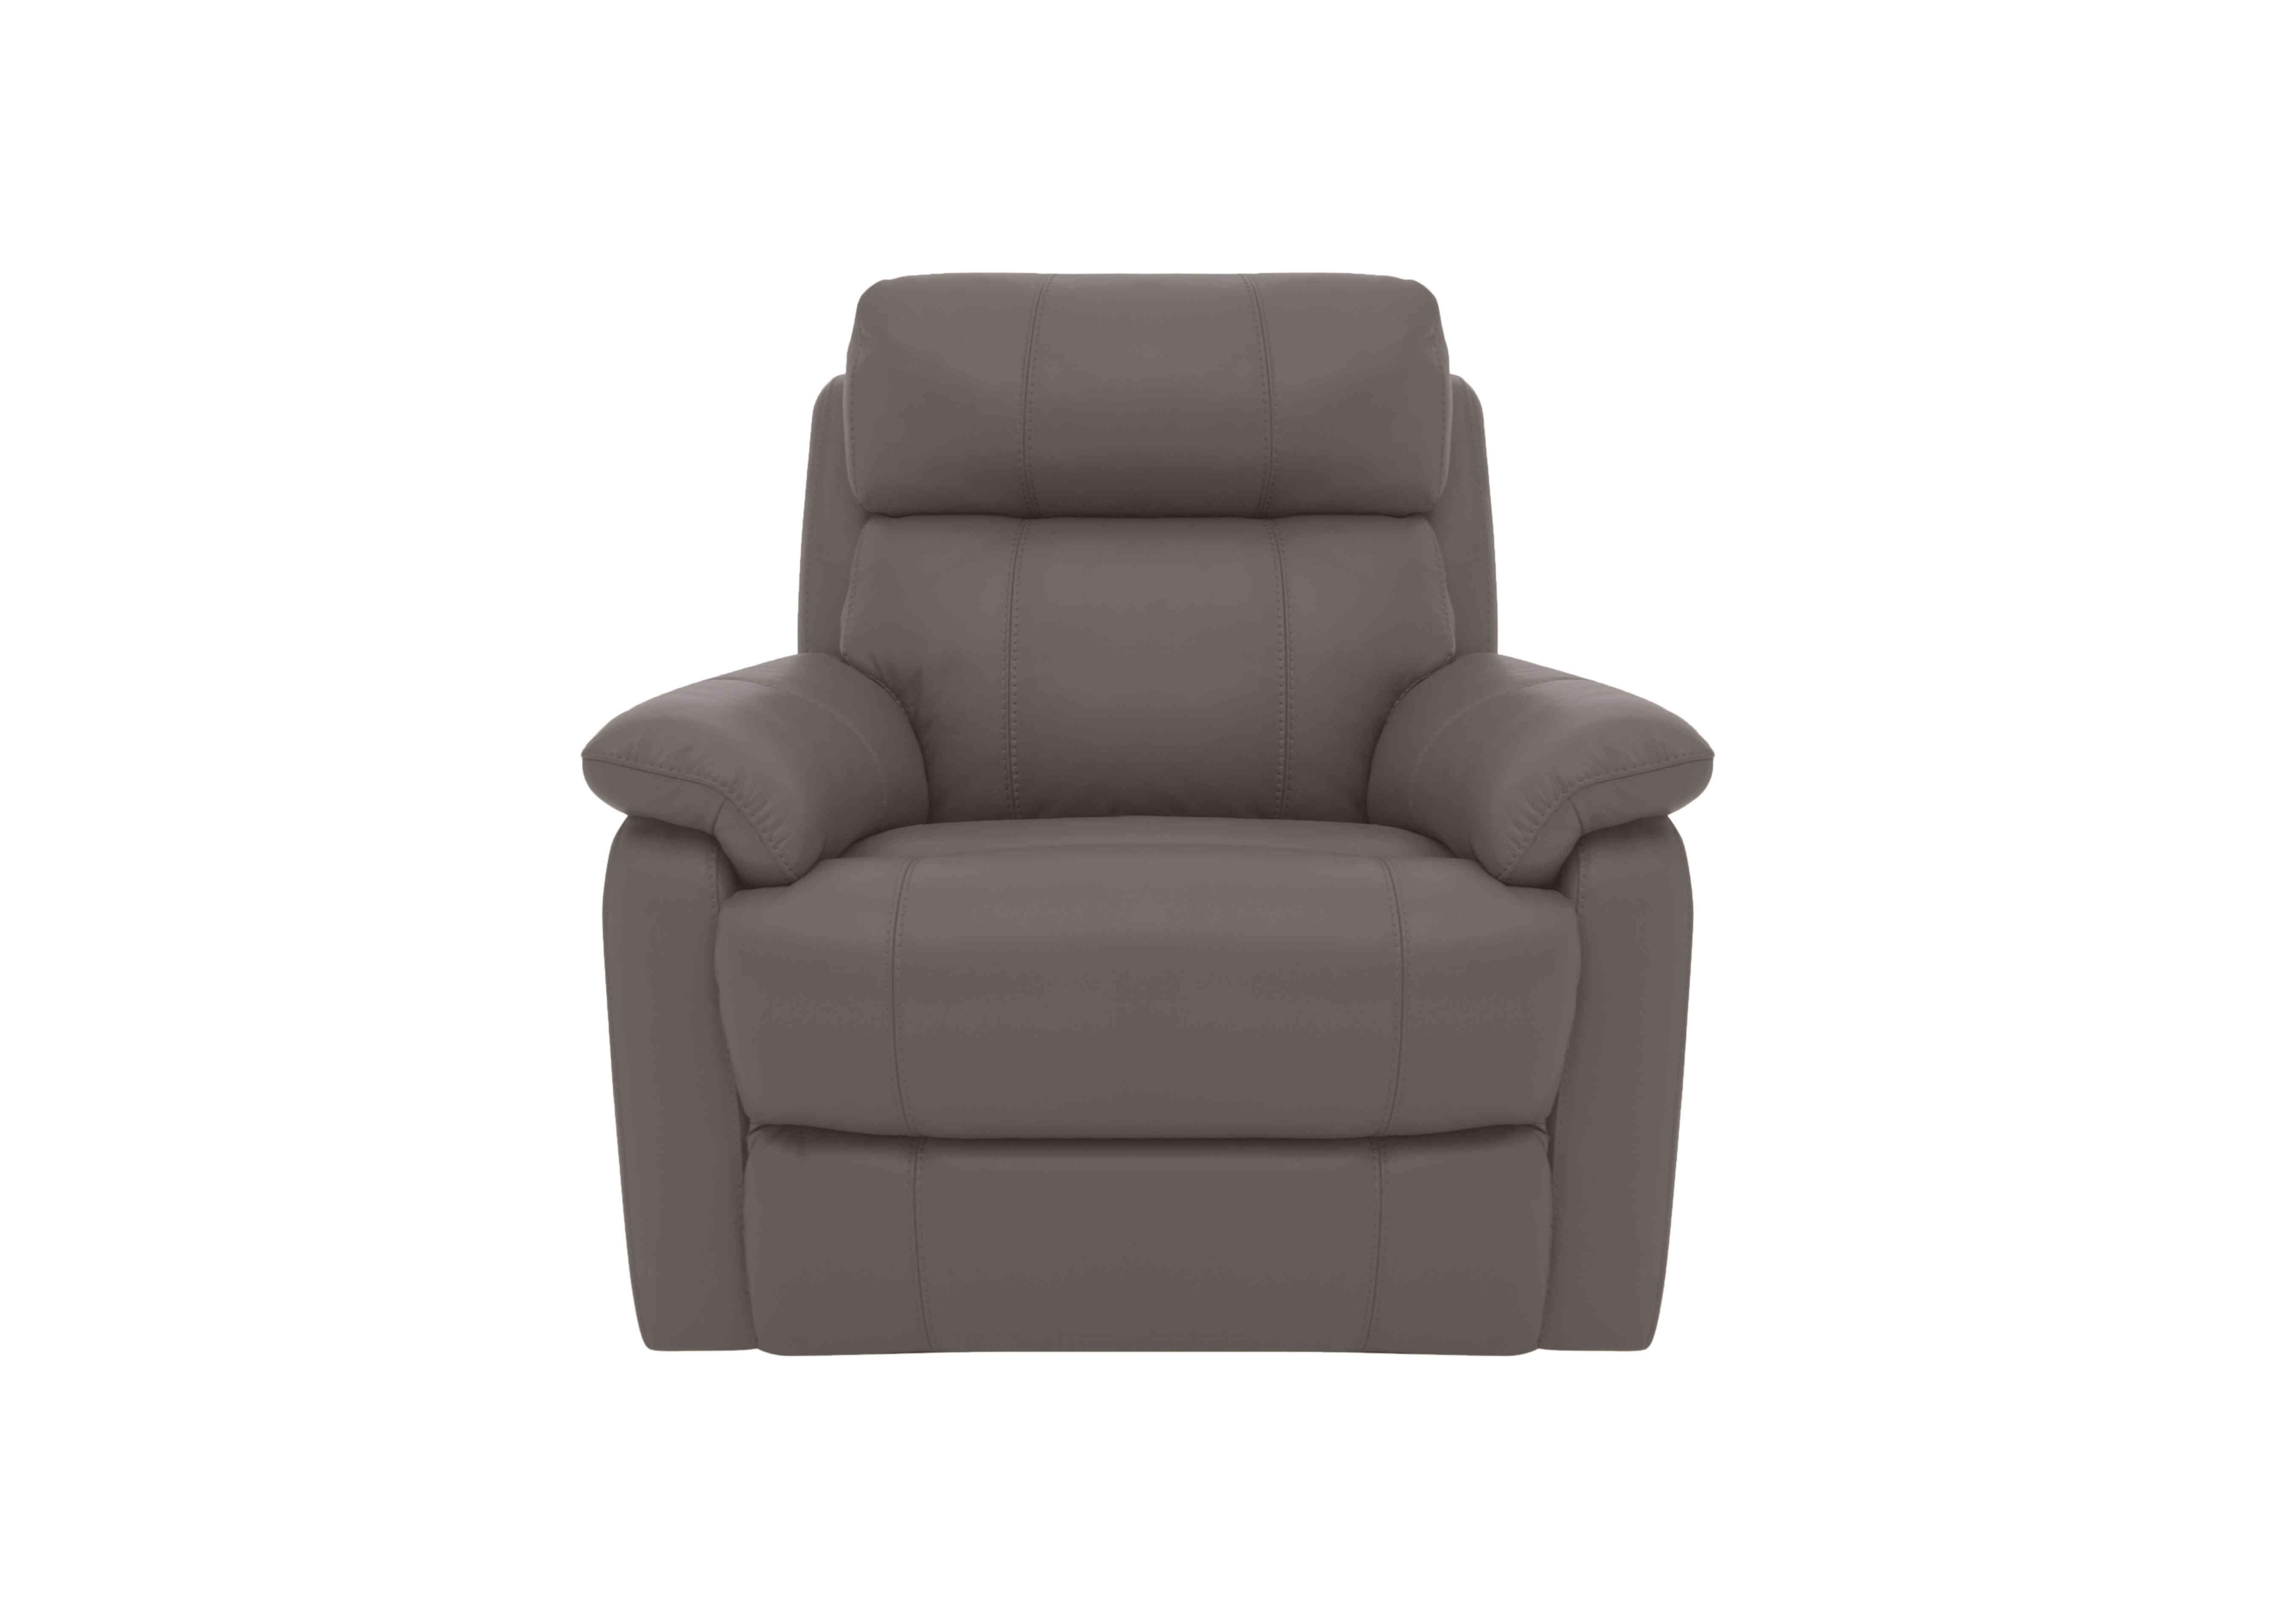 Relax Station Komodo Leather Power Armchair in Bv-042e Elephant on Furniture Village